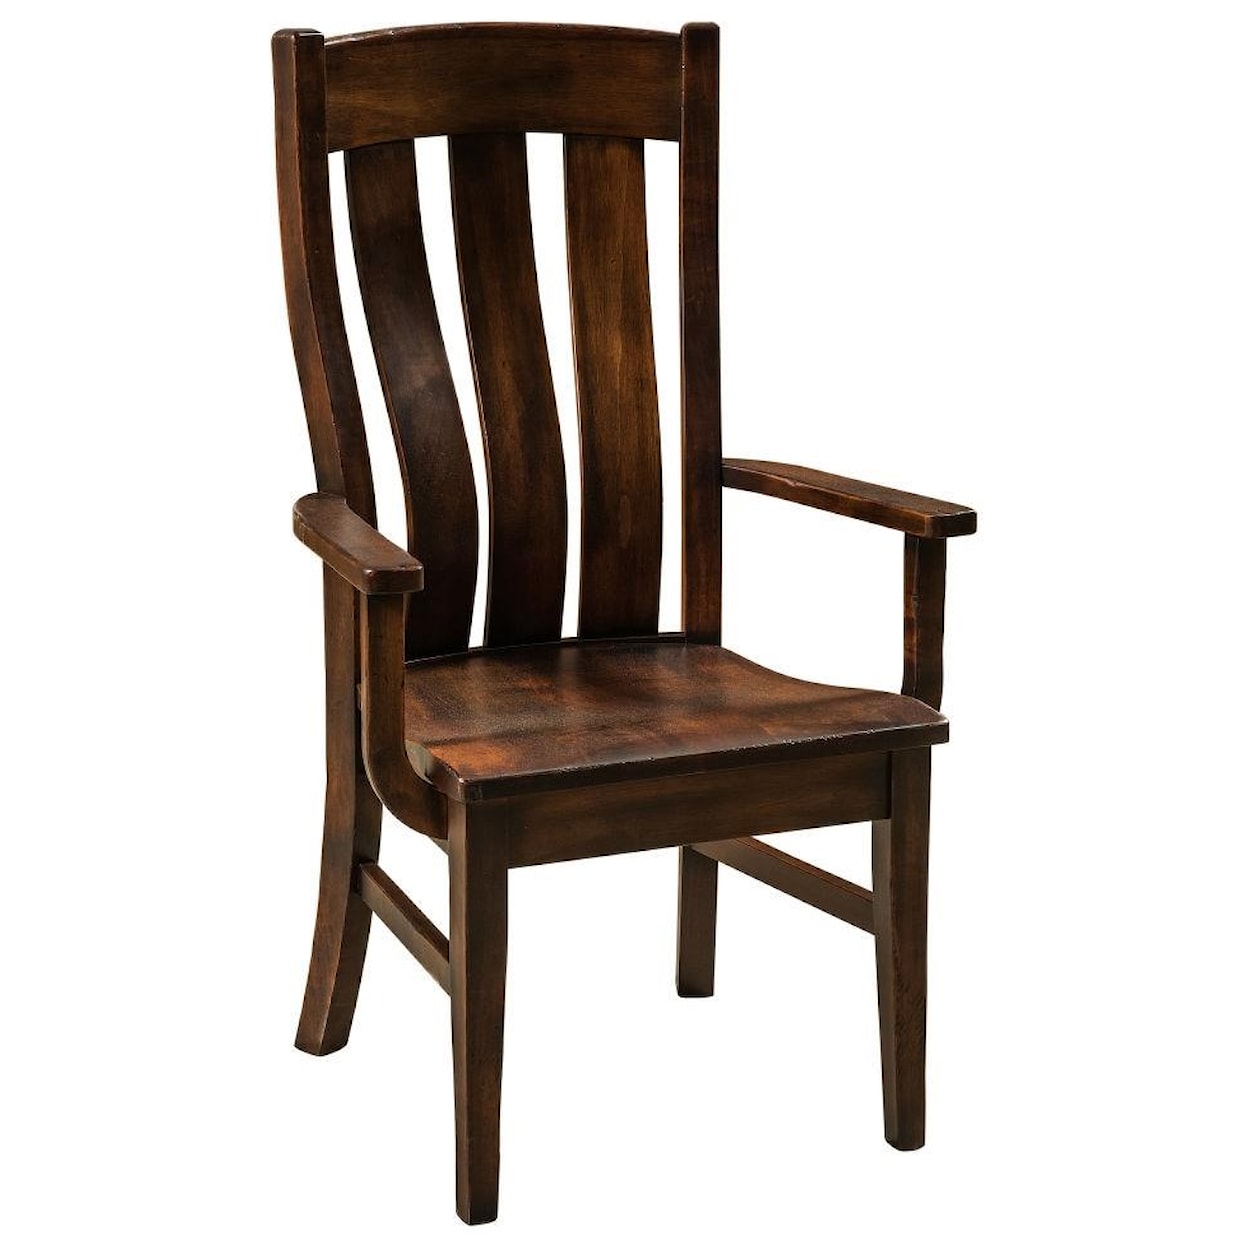 F&N Woodworking Chesterton Arm Chair